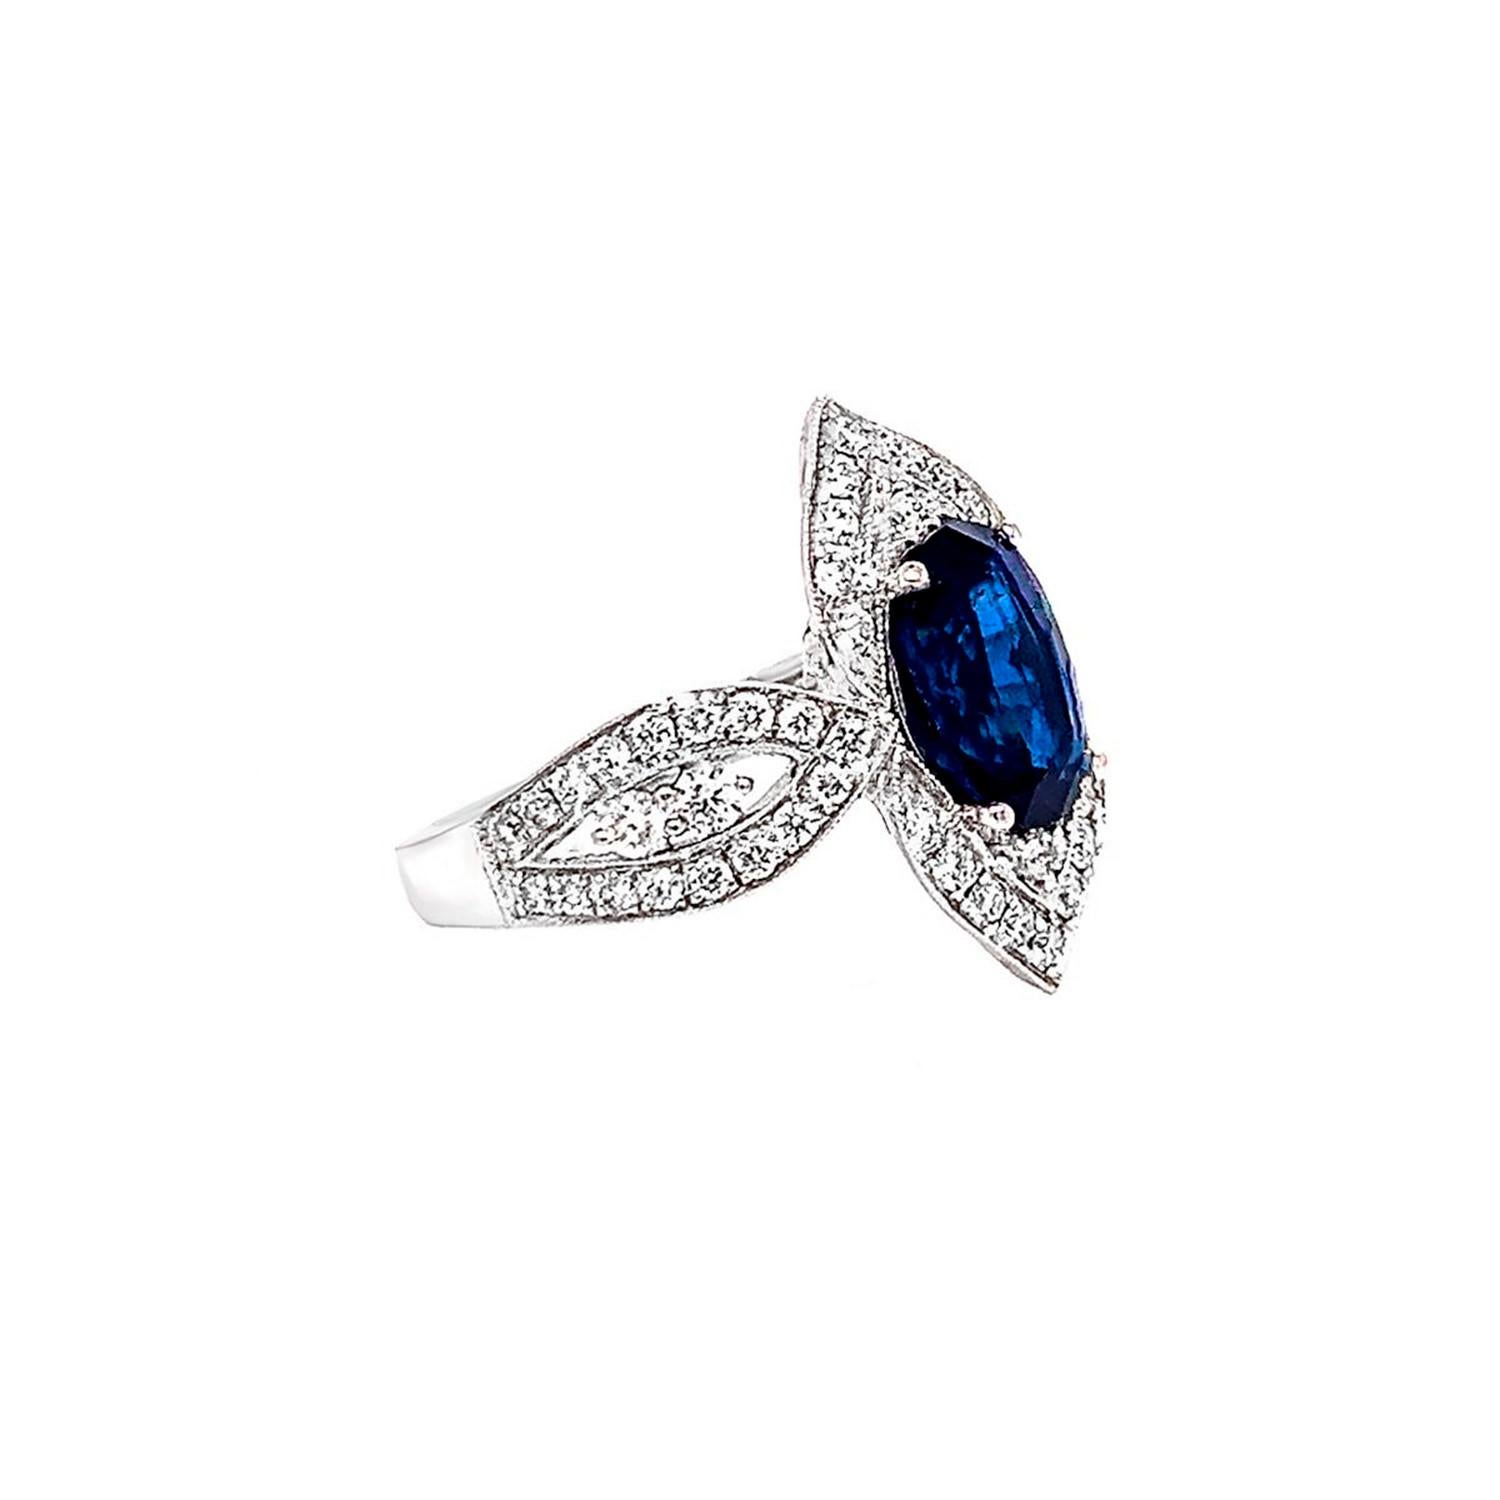 Sapphire Ring With Diamonds 3.27 Carats 18K White Gold In Excellent Condition For Sale In Laguna Niguel, CA